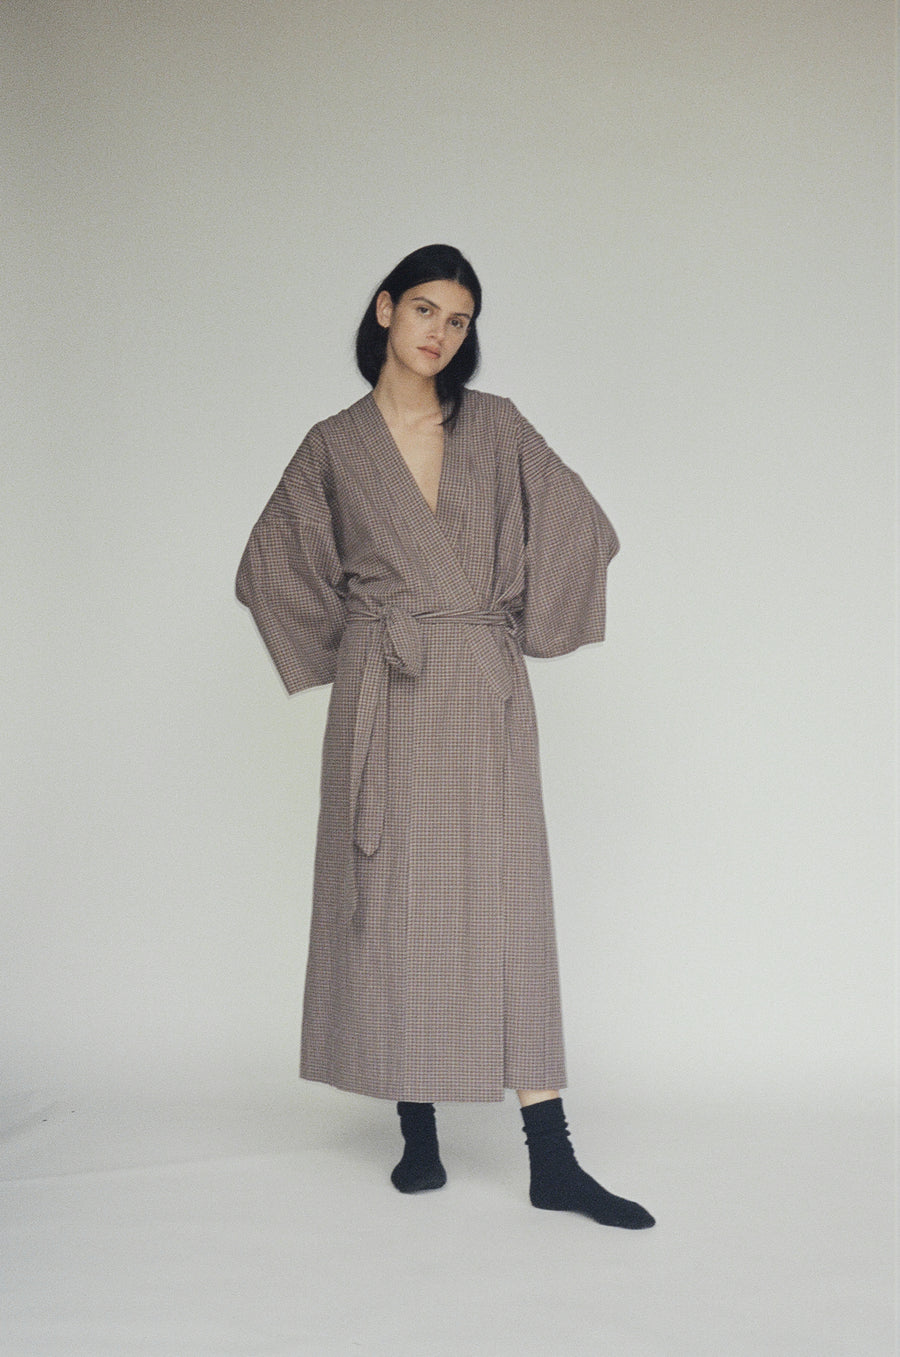 the 02 robe - russet check